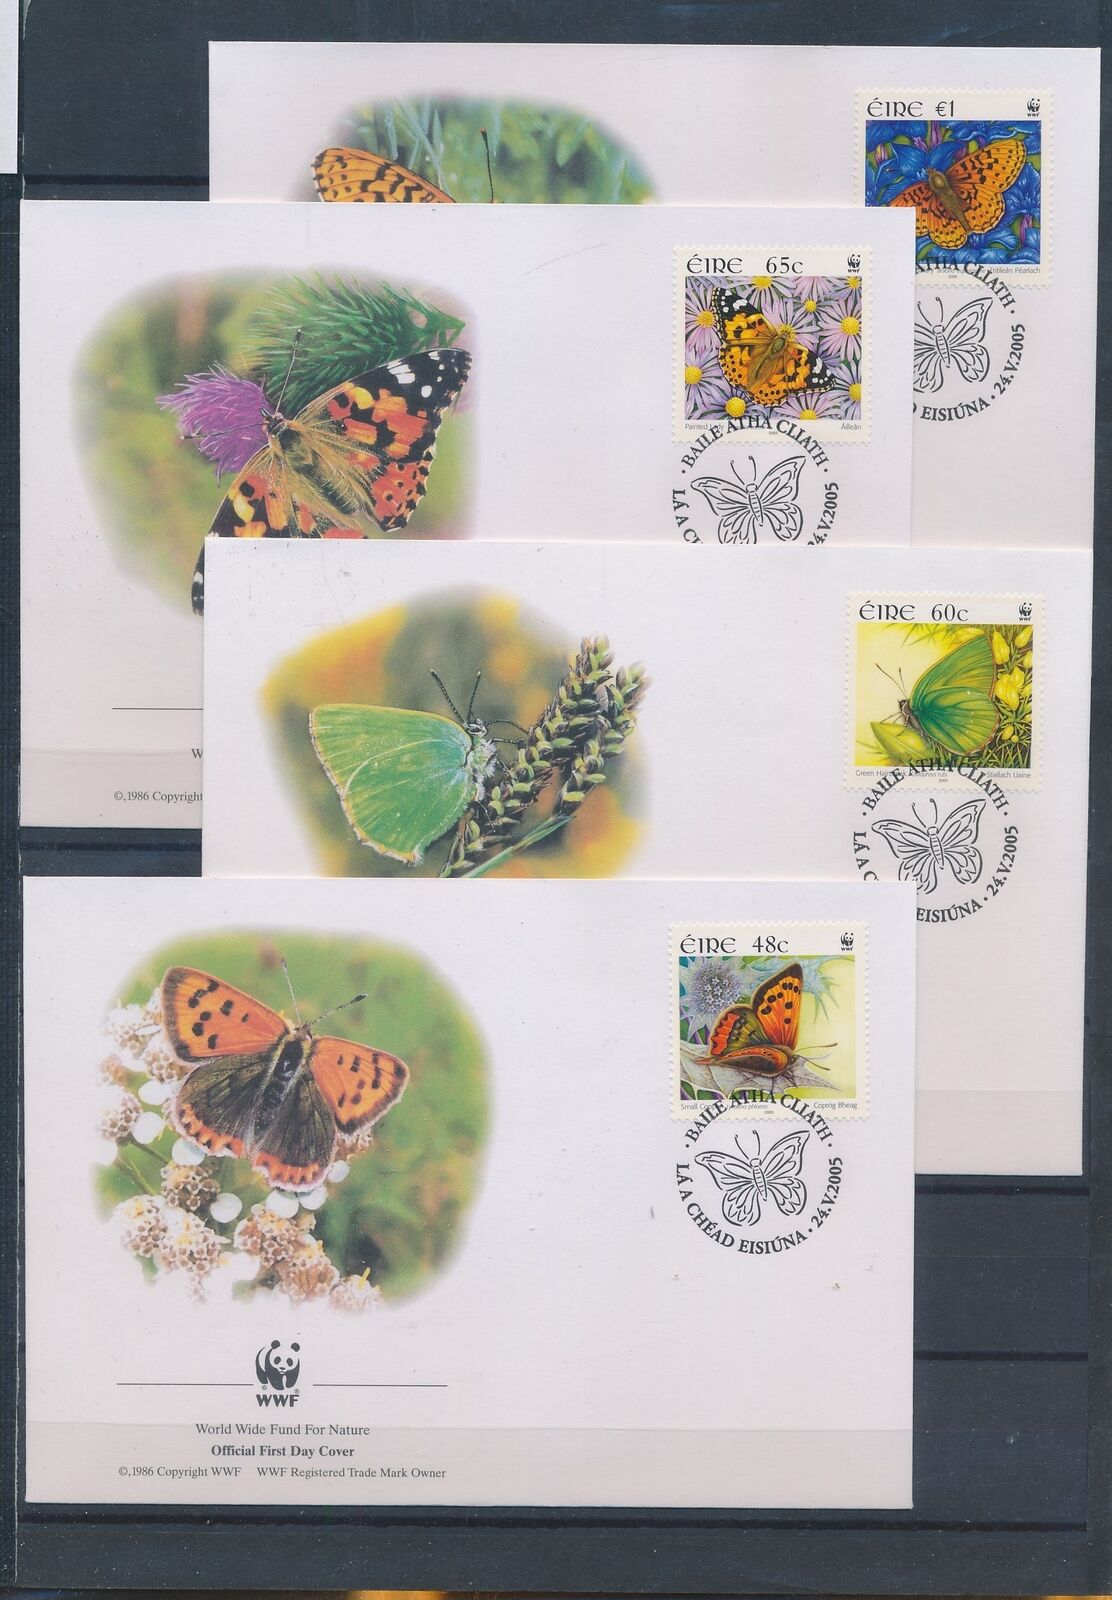 Xc87414 Ireland 2005 Insects Bugs Flora Butterflies Wwf Fdc's Used